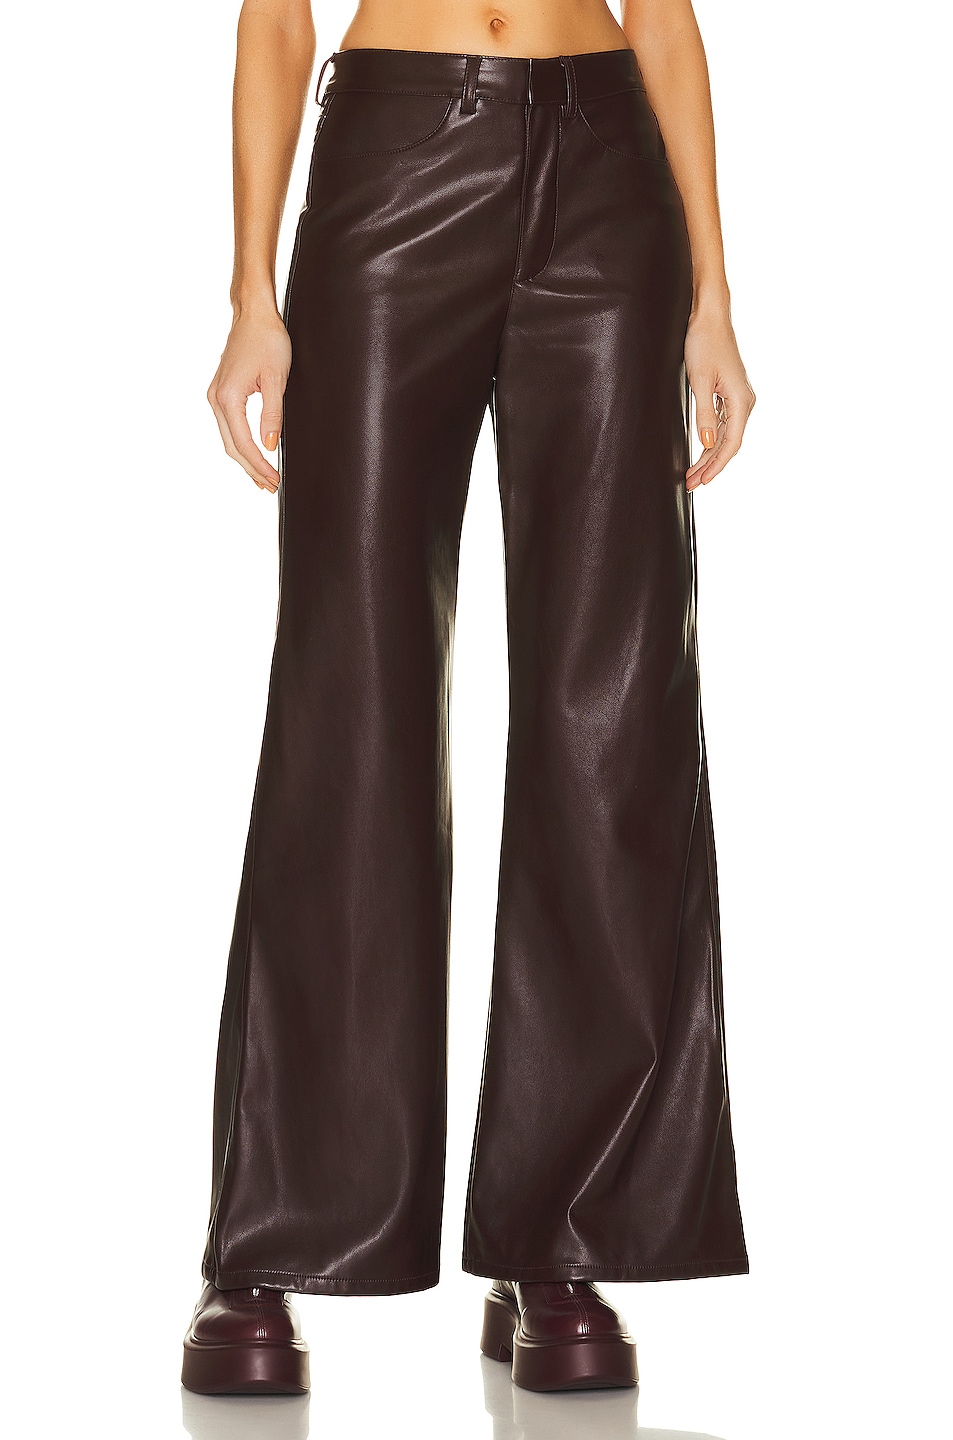 Image 1 of Enza Costa Vegan Leather Wide Leg Pant in Chocolate